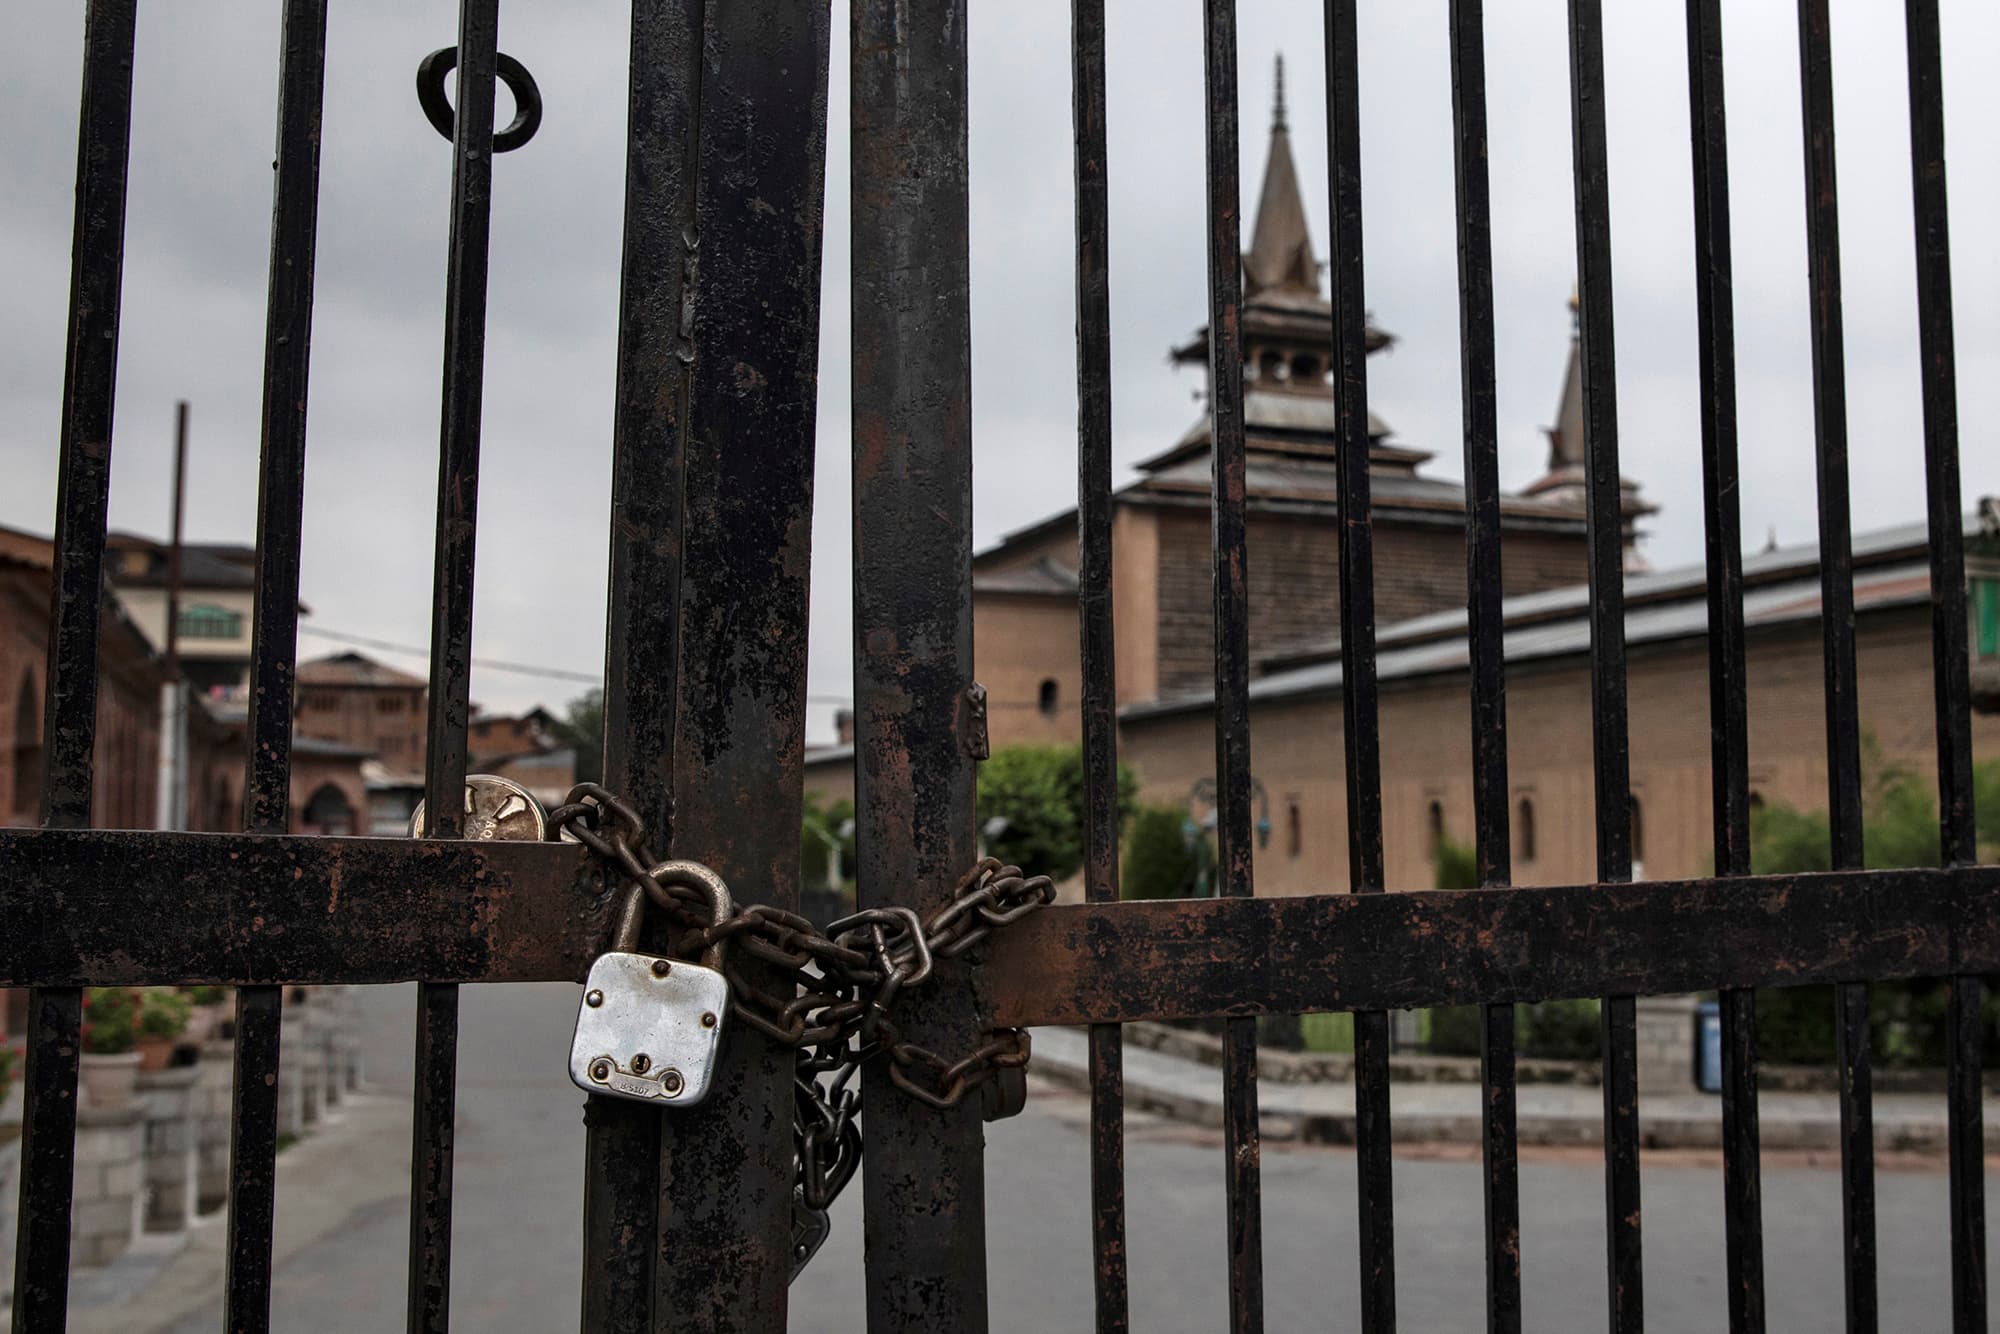 Jamia Masjid is seen locked during restrictions ahead of Eid-al-Adha after scrapping of the special constitutional status for Kashmir by the government, in Srinagar, August 11, 2019. REUTERS/Danish Siddiqui